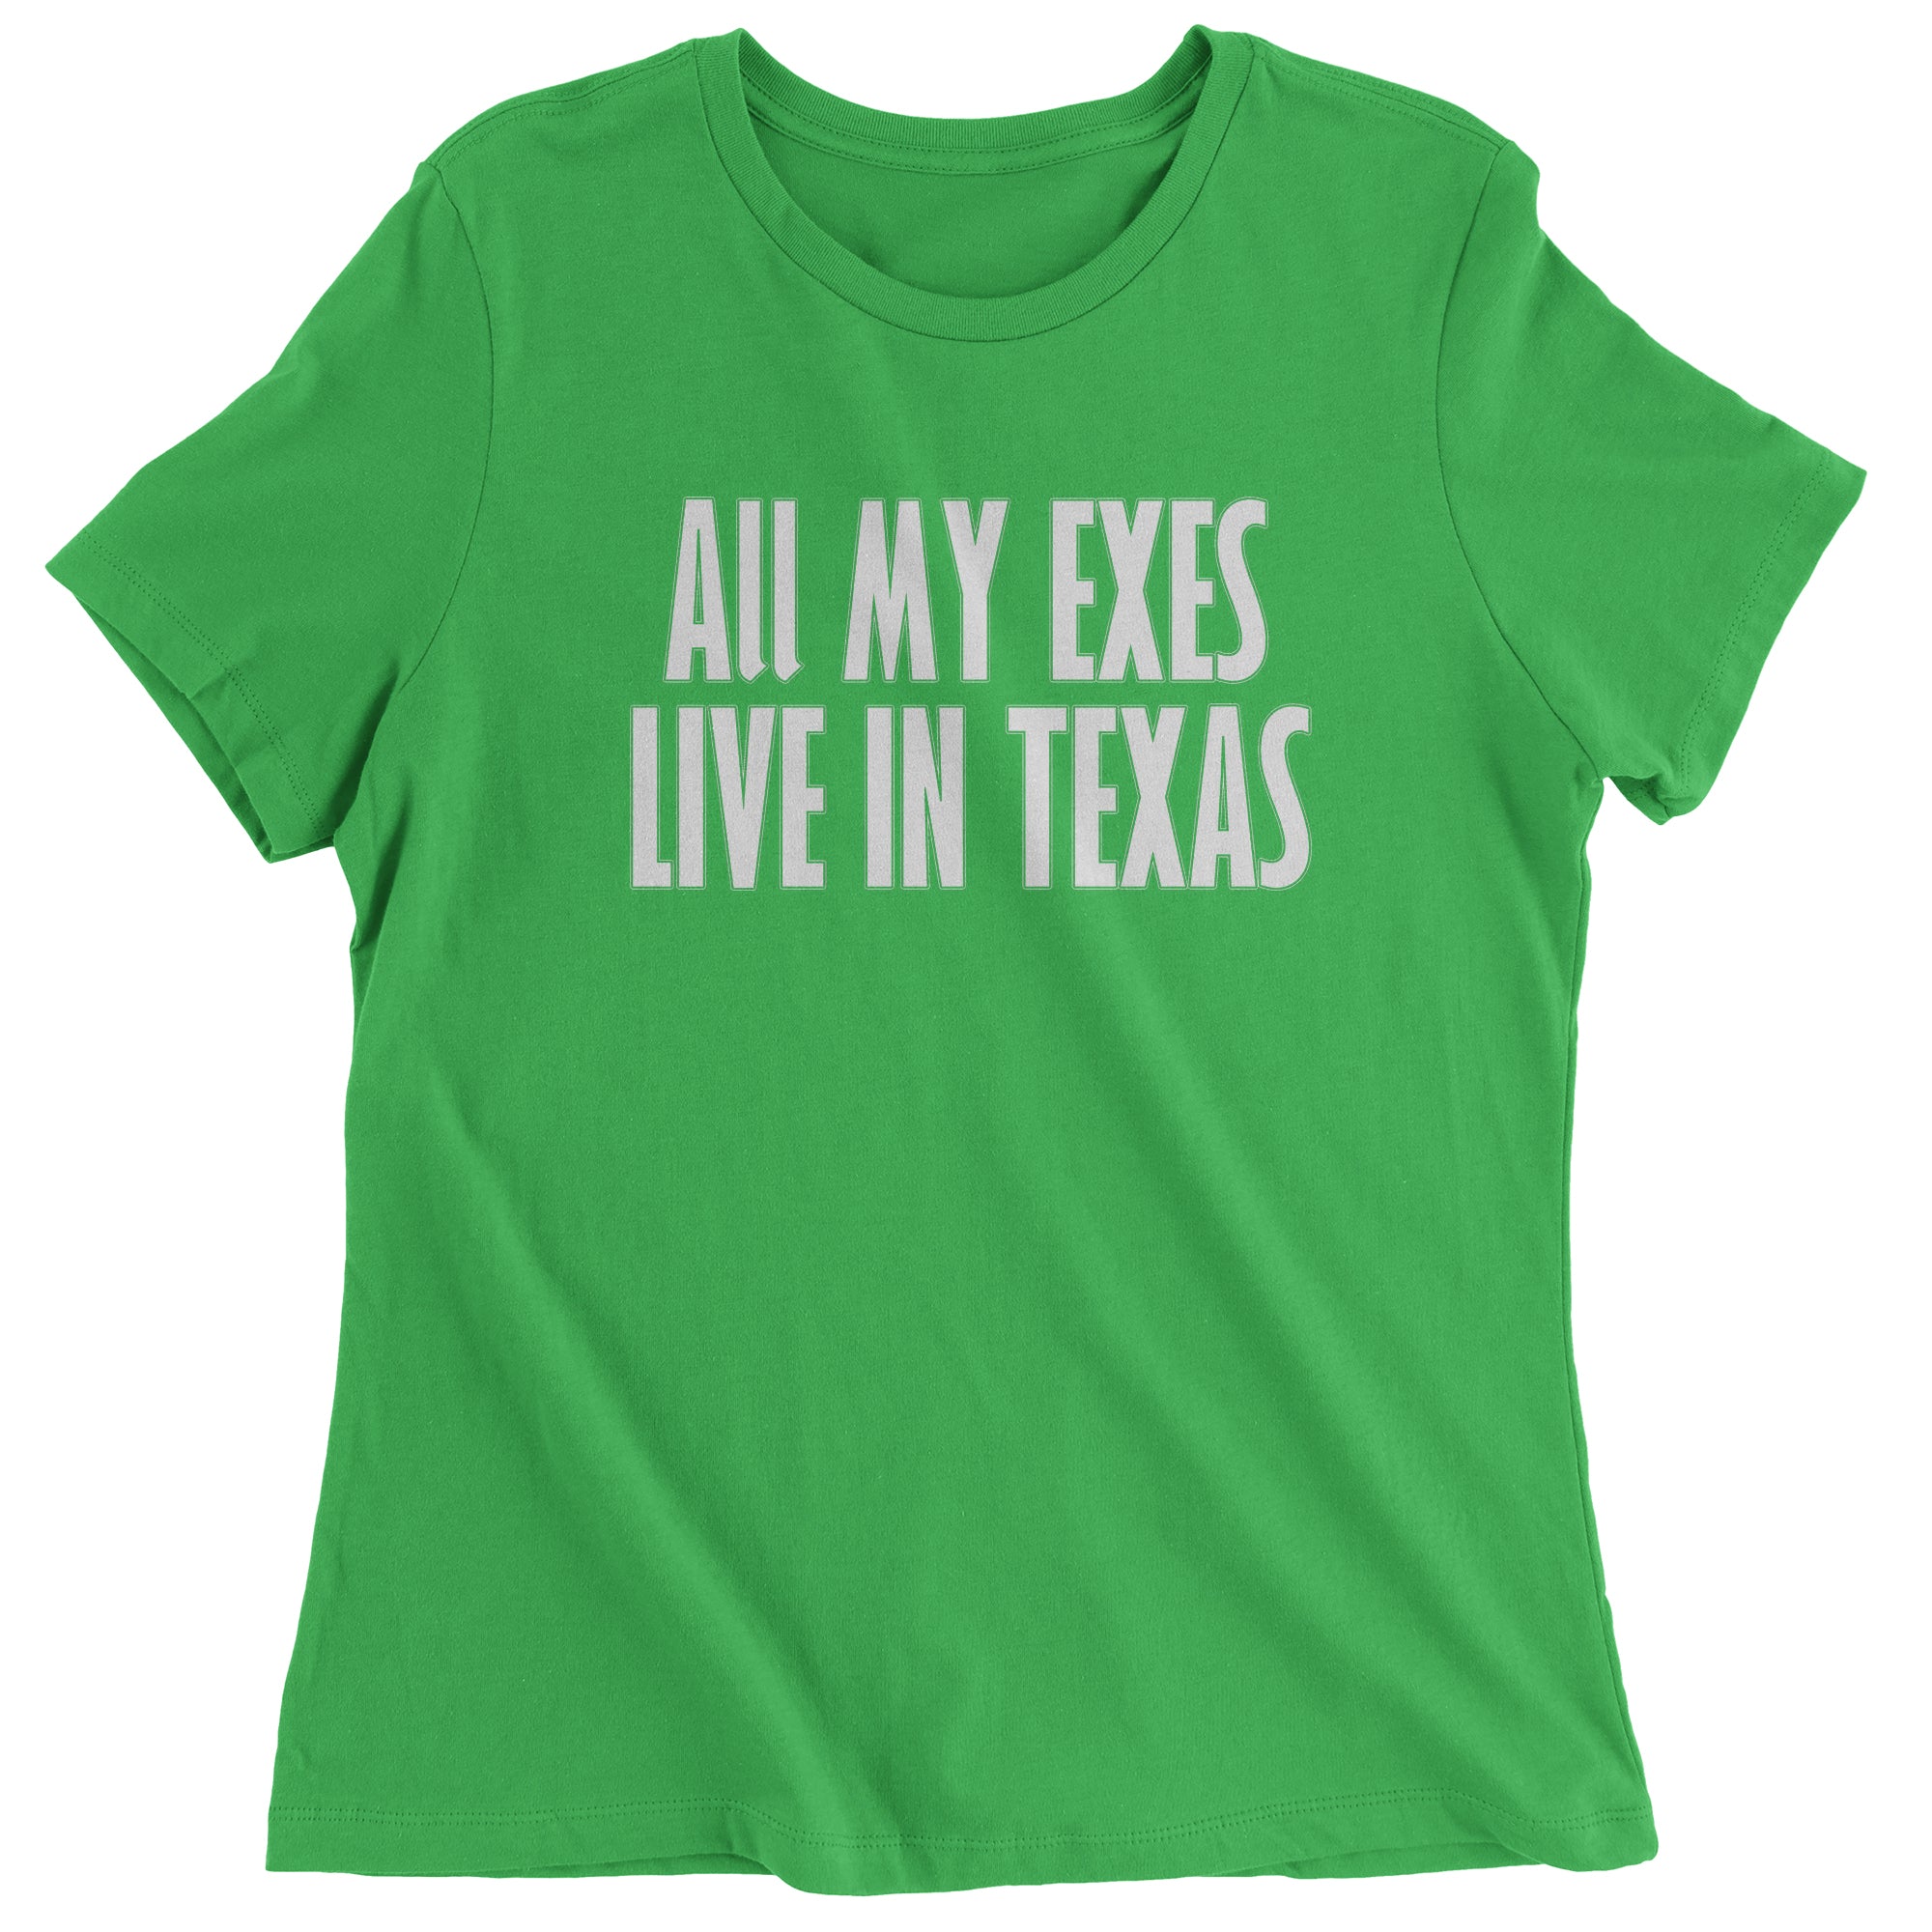 All My Exes Live In Texas Women's T-Shirt